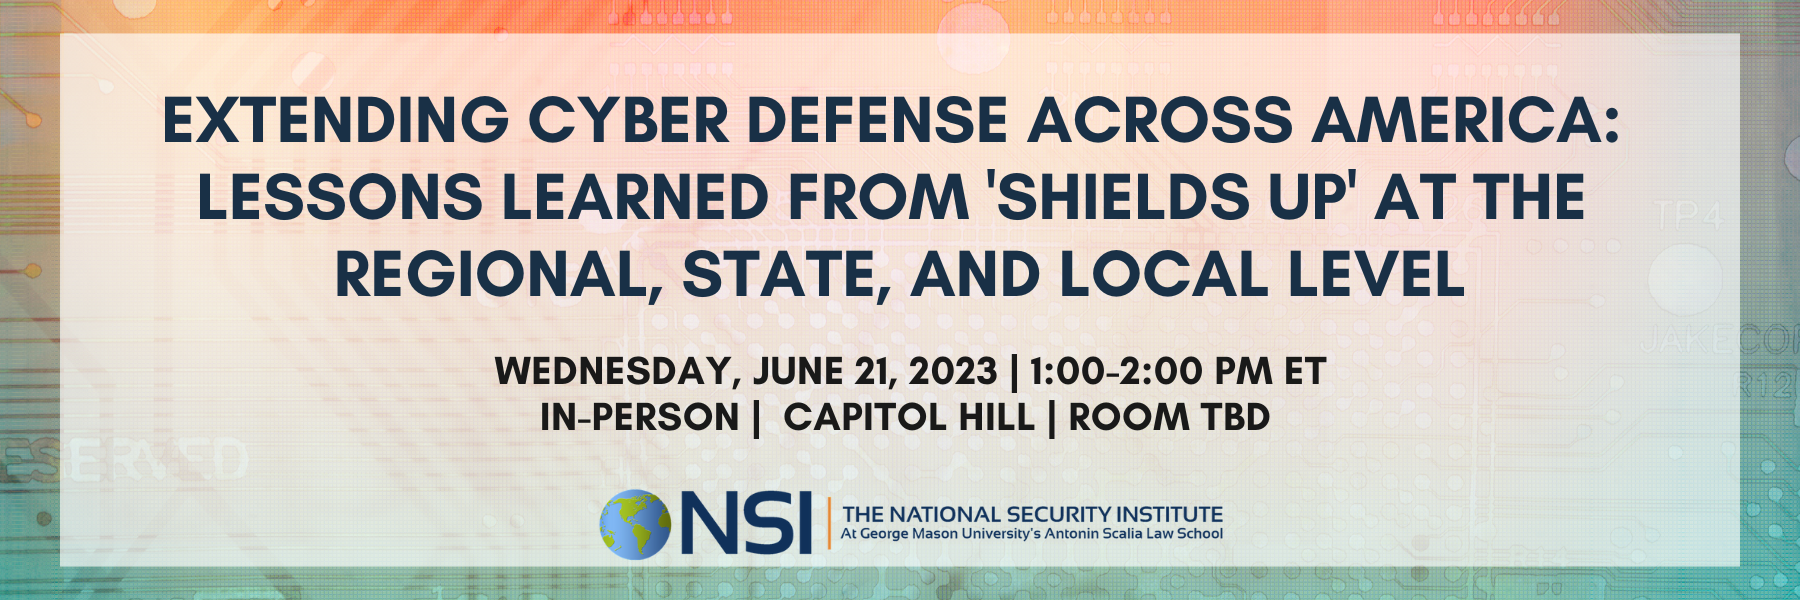 Extending Cyber Defense Across America: Lessons Learned from 'Shields Up' at the Regional, State, and Local Level